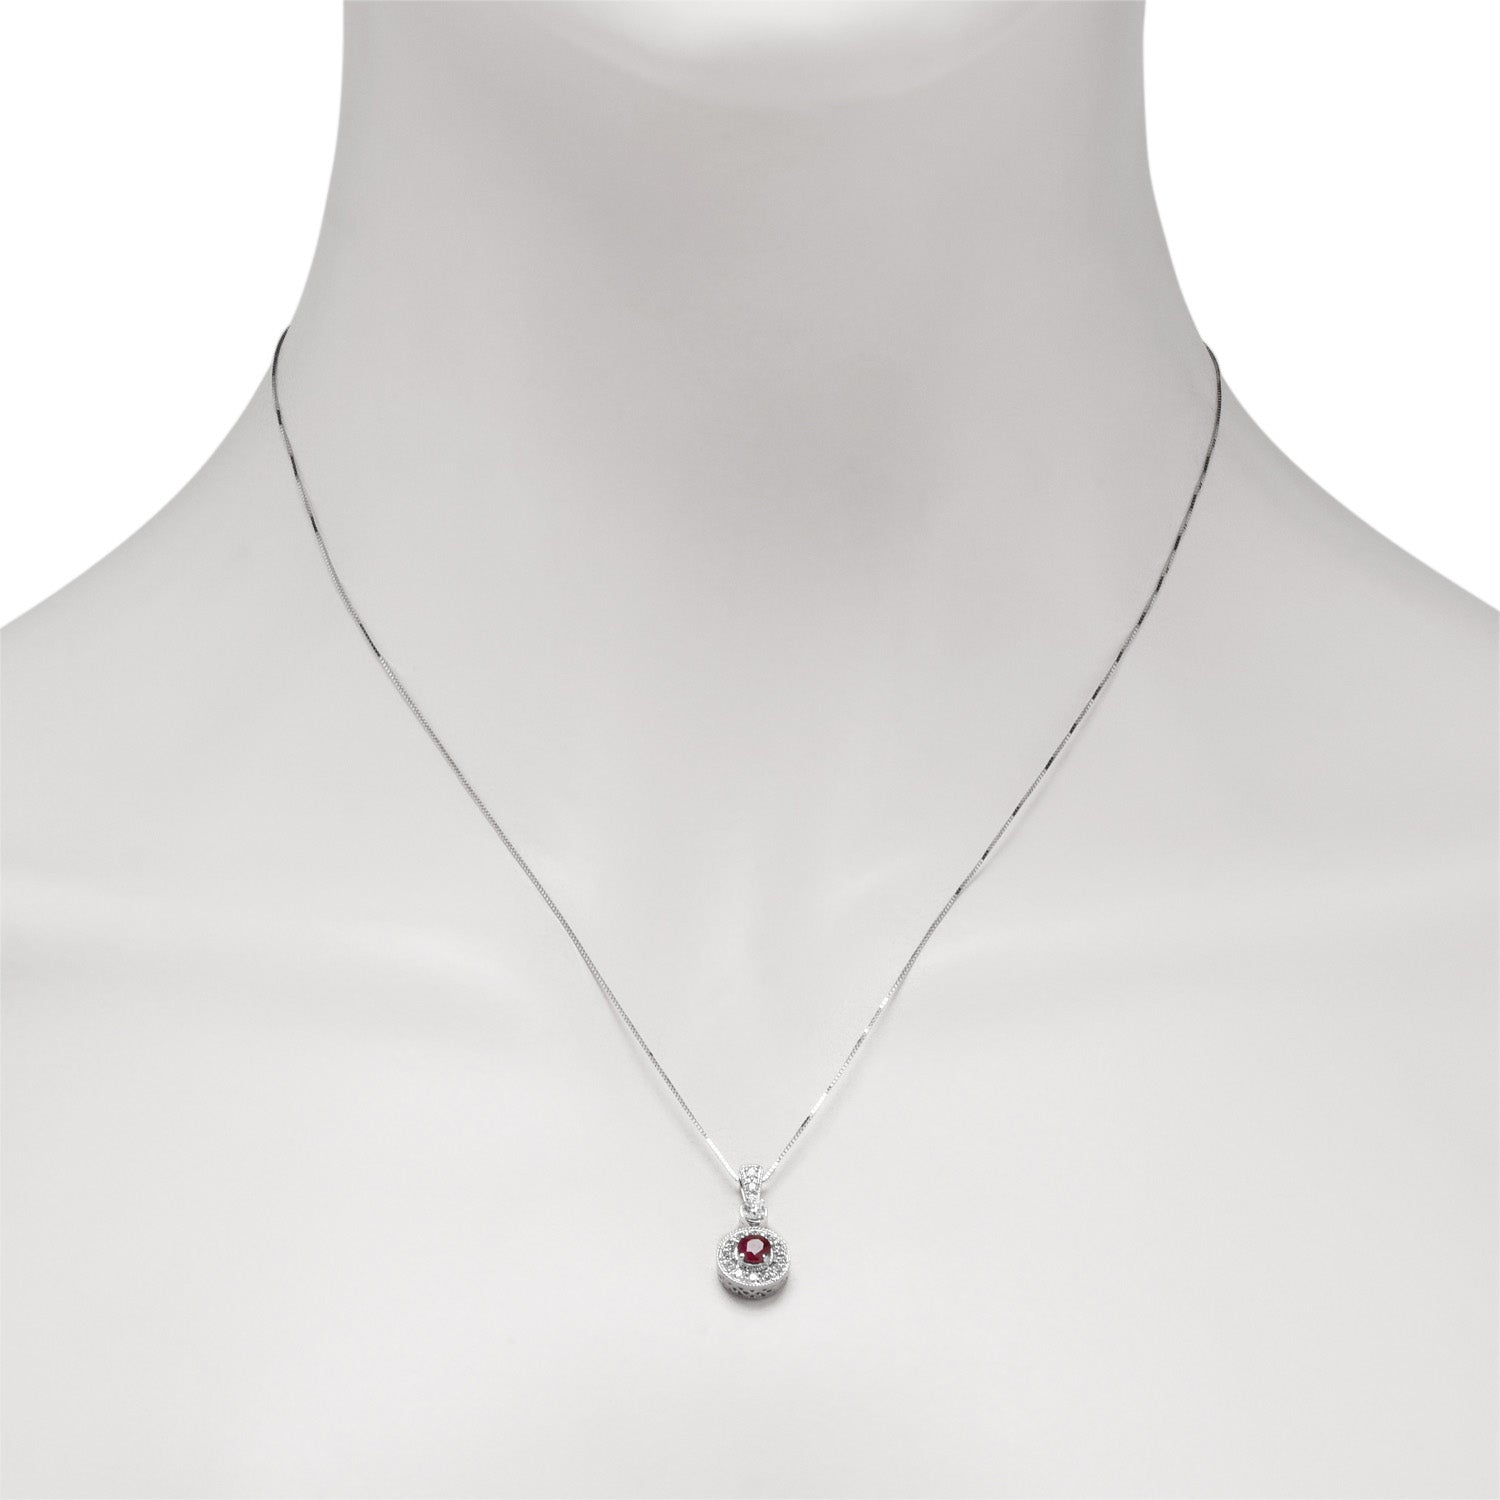 Ruby Necklace in 14kt White Gold with Diamonds (1/4ct tw)